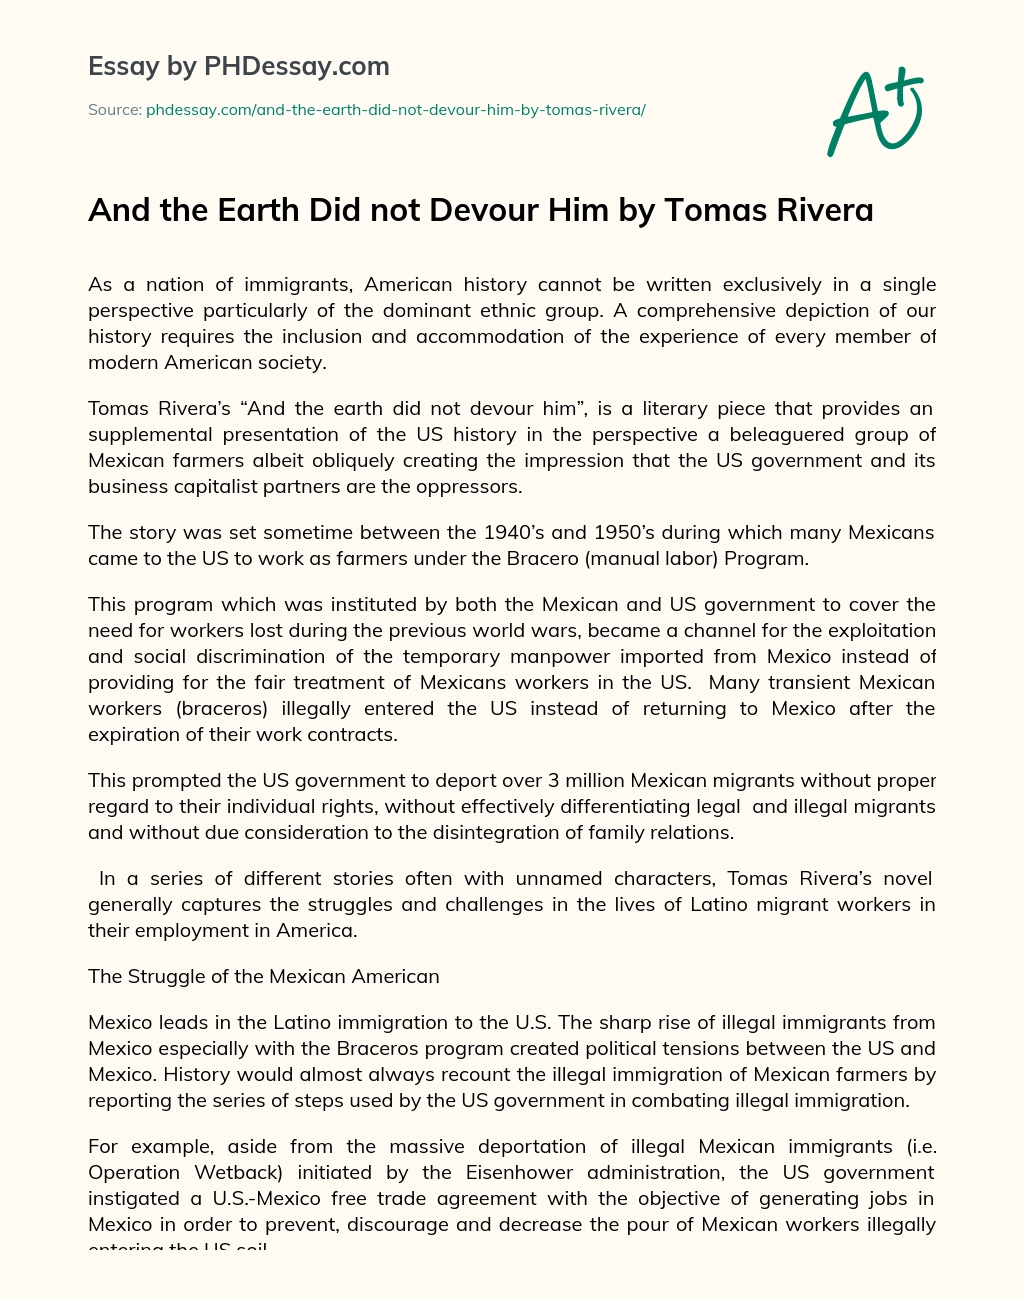 And the Earth Did not Devour Him by Tomas Rivera essay